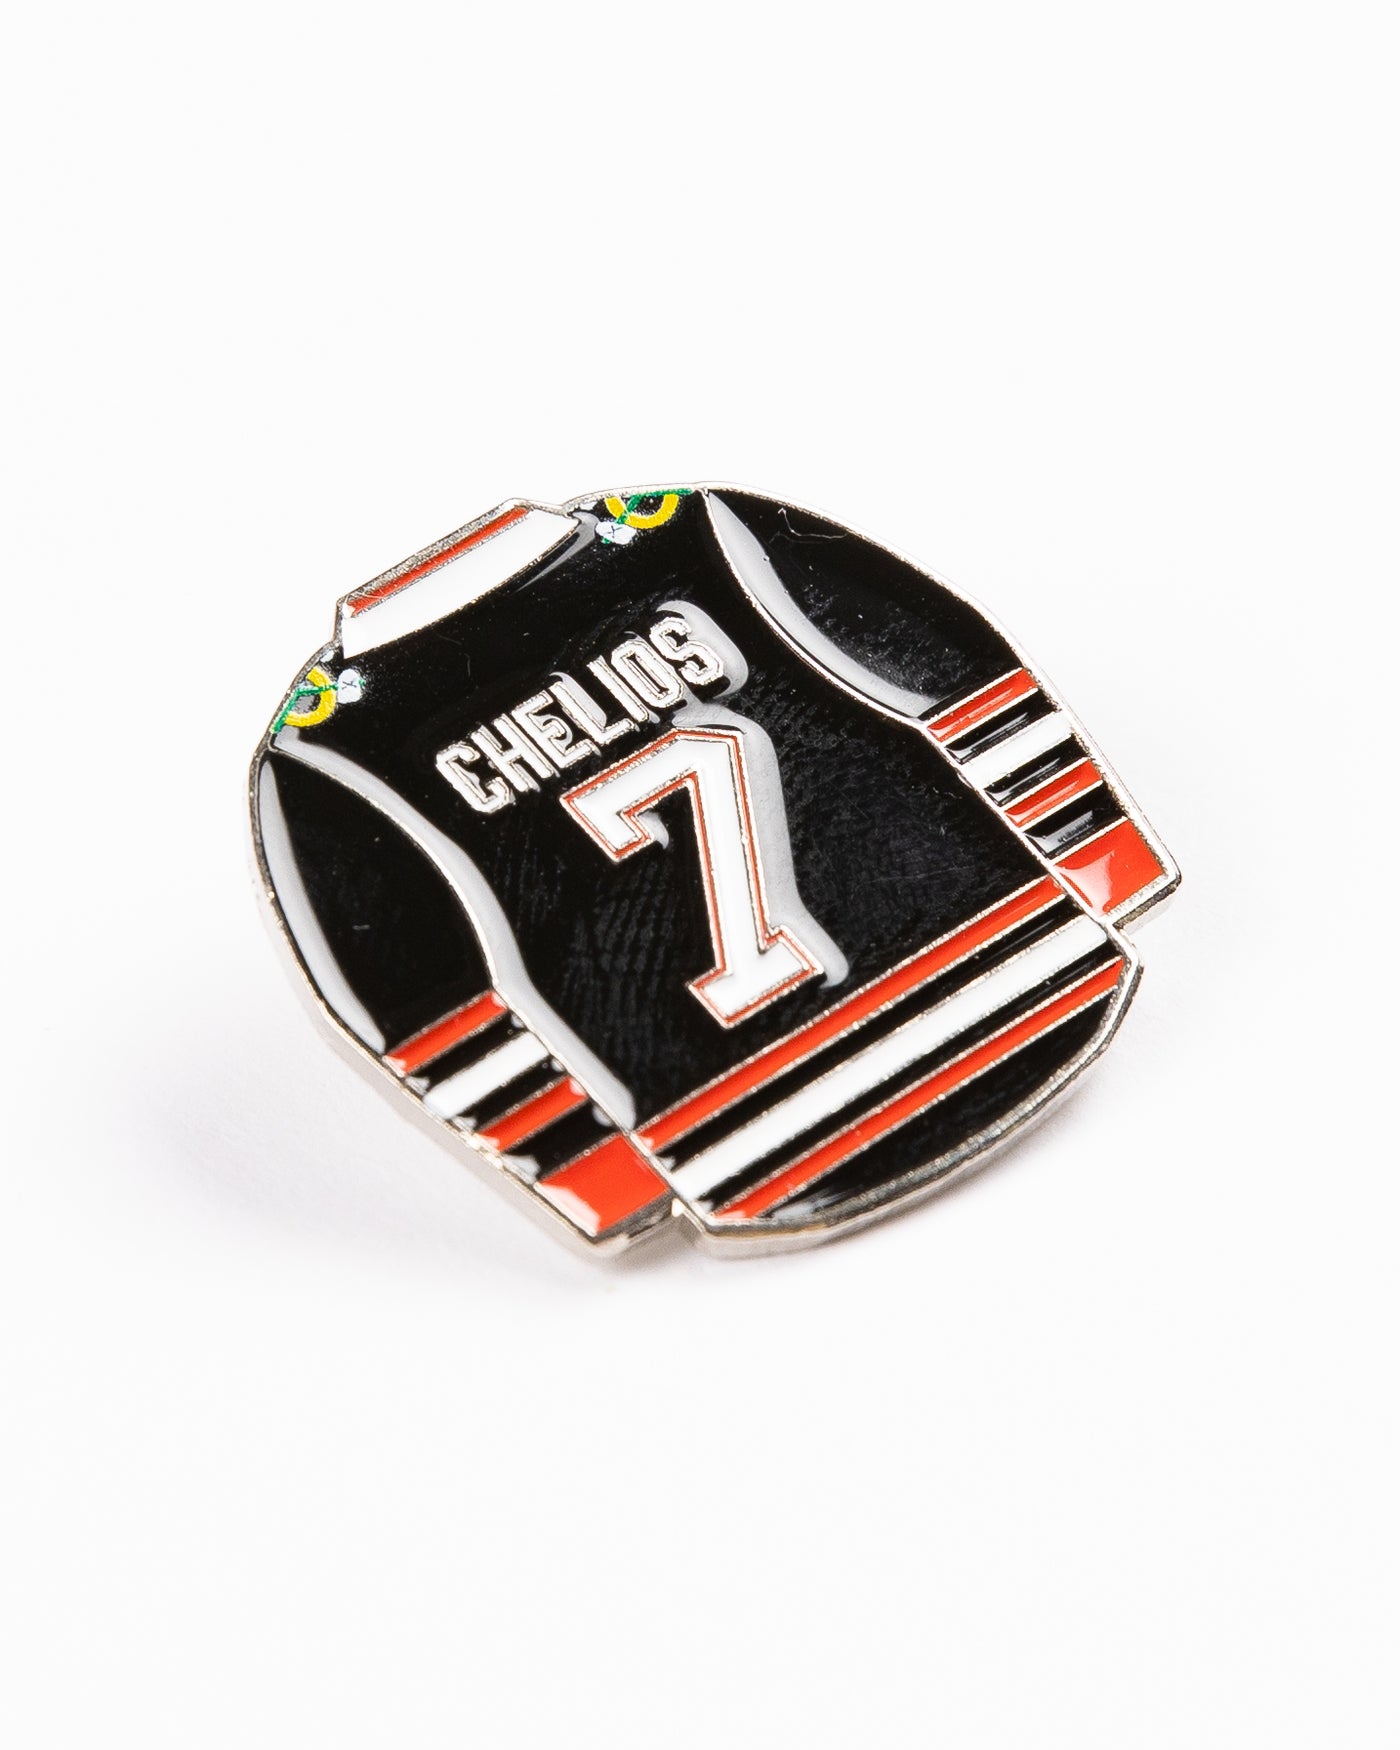 pin with Chicago Blackhawks jersey inspired design for Chris Chelios retirement - angled lay flat